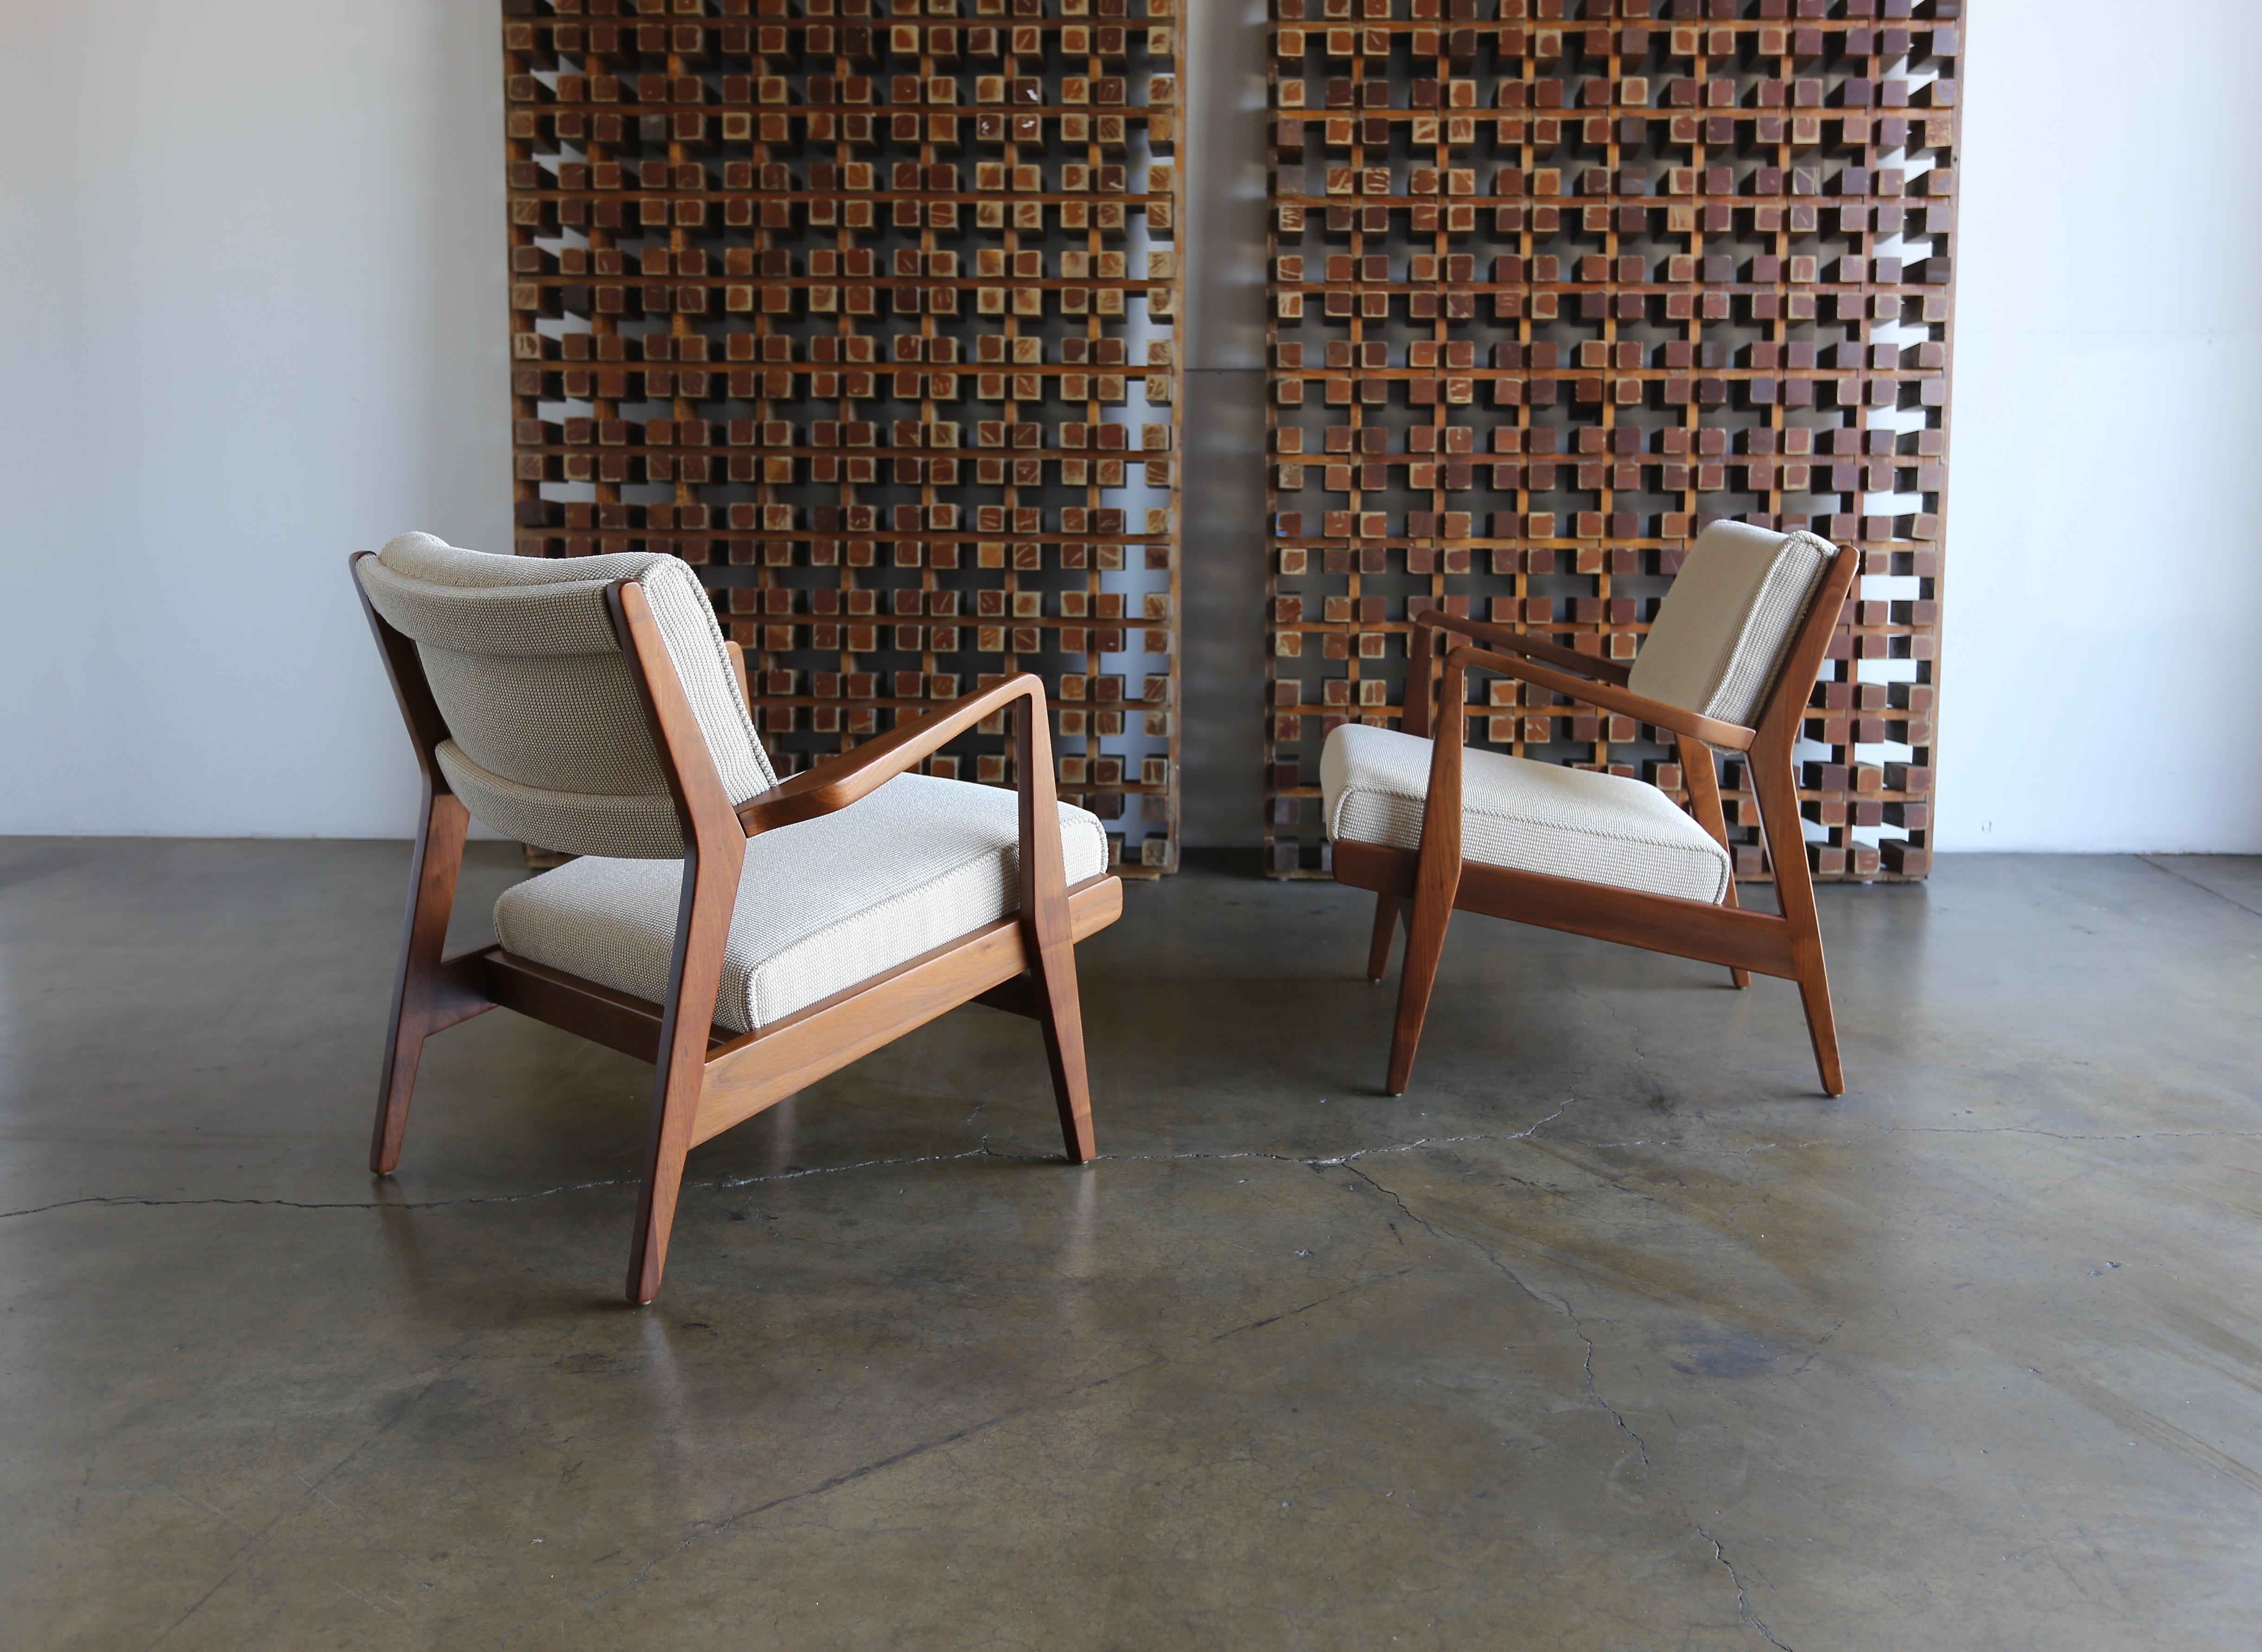 Pair of walnut framed lounge chairs by Jens Risom for Jens Risom Designs. This pair has been professionally restored.